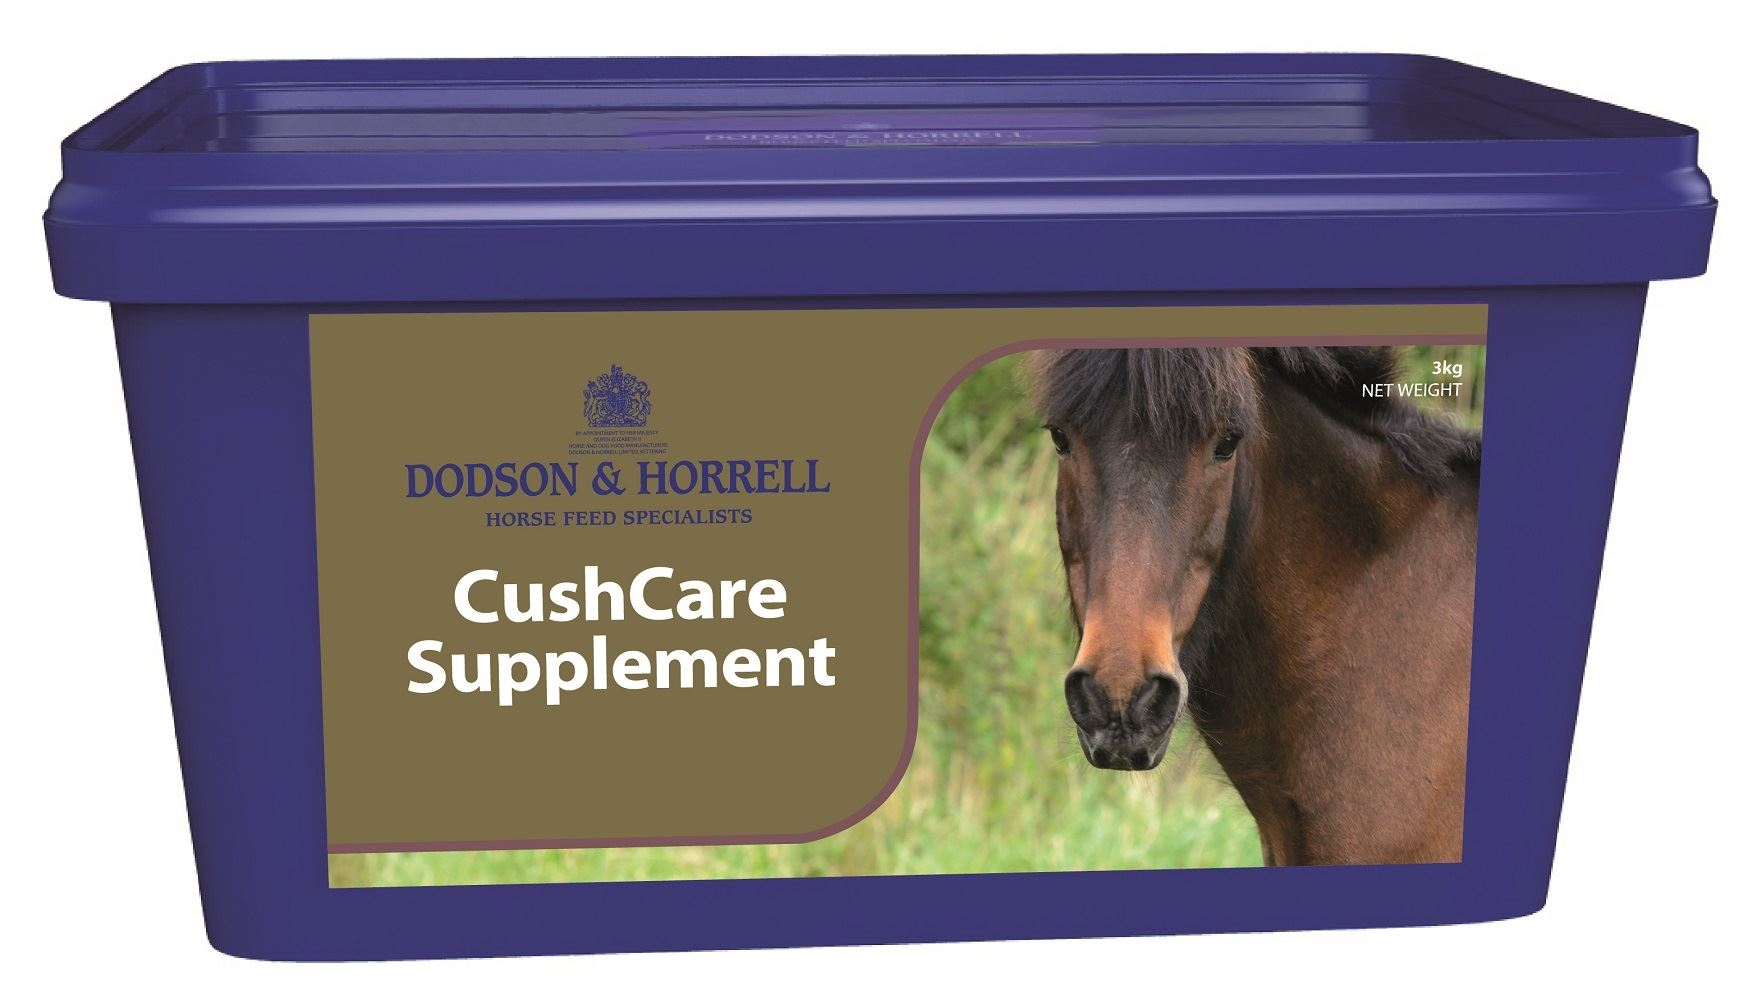 Dodson & Horrell Cushcare Supplement - Just Horse Riders